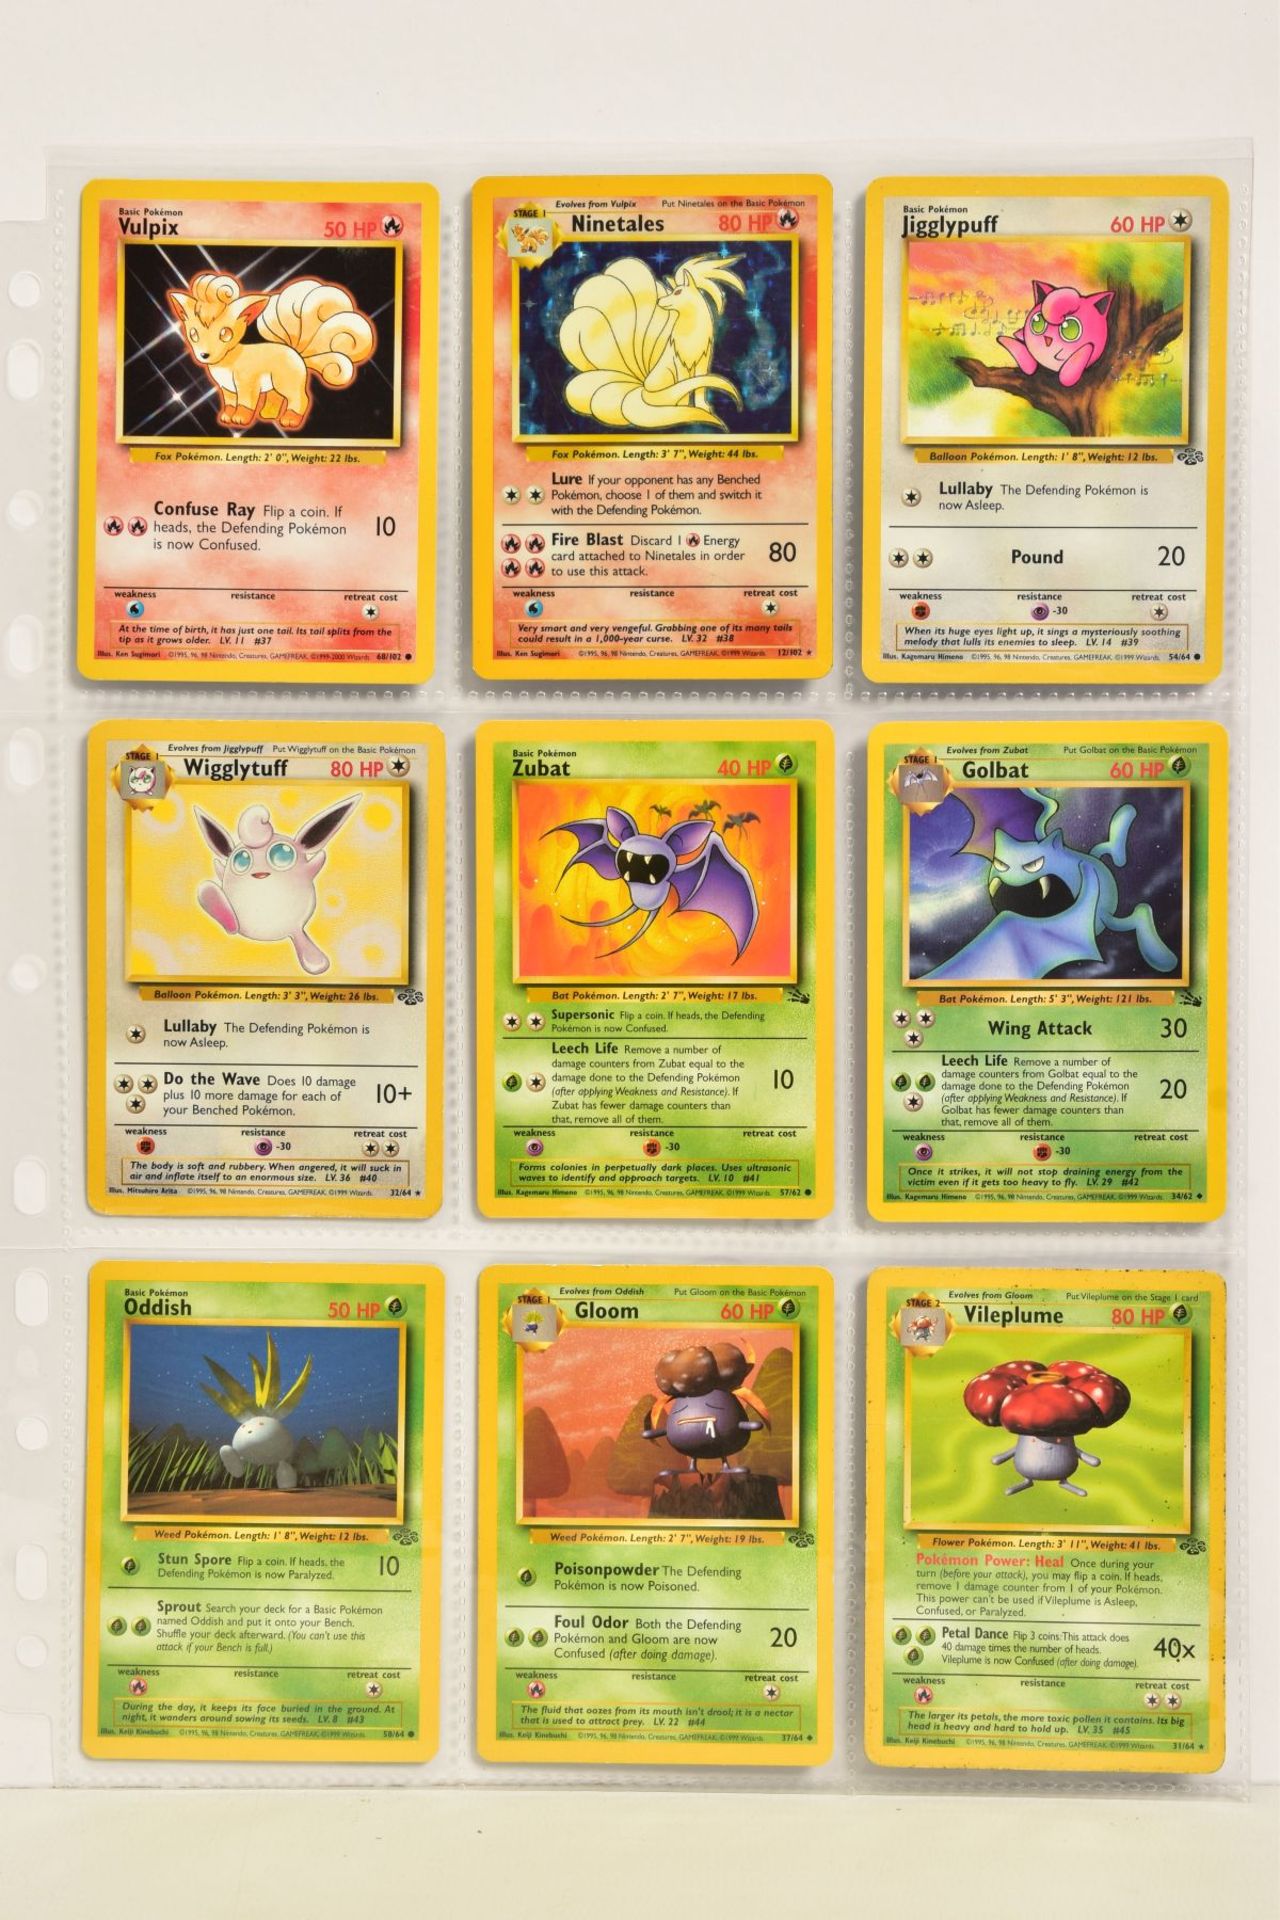 POKEMON THE TRADING CARD GAME 154 CARDS IN POKEMON TCG FOLDER, includes one of each of the - Image 6 of 20